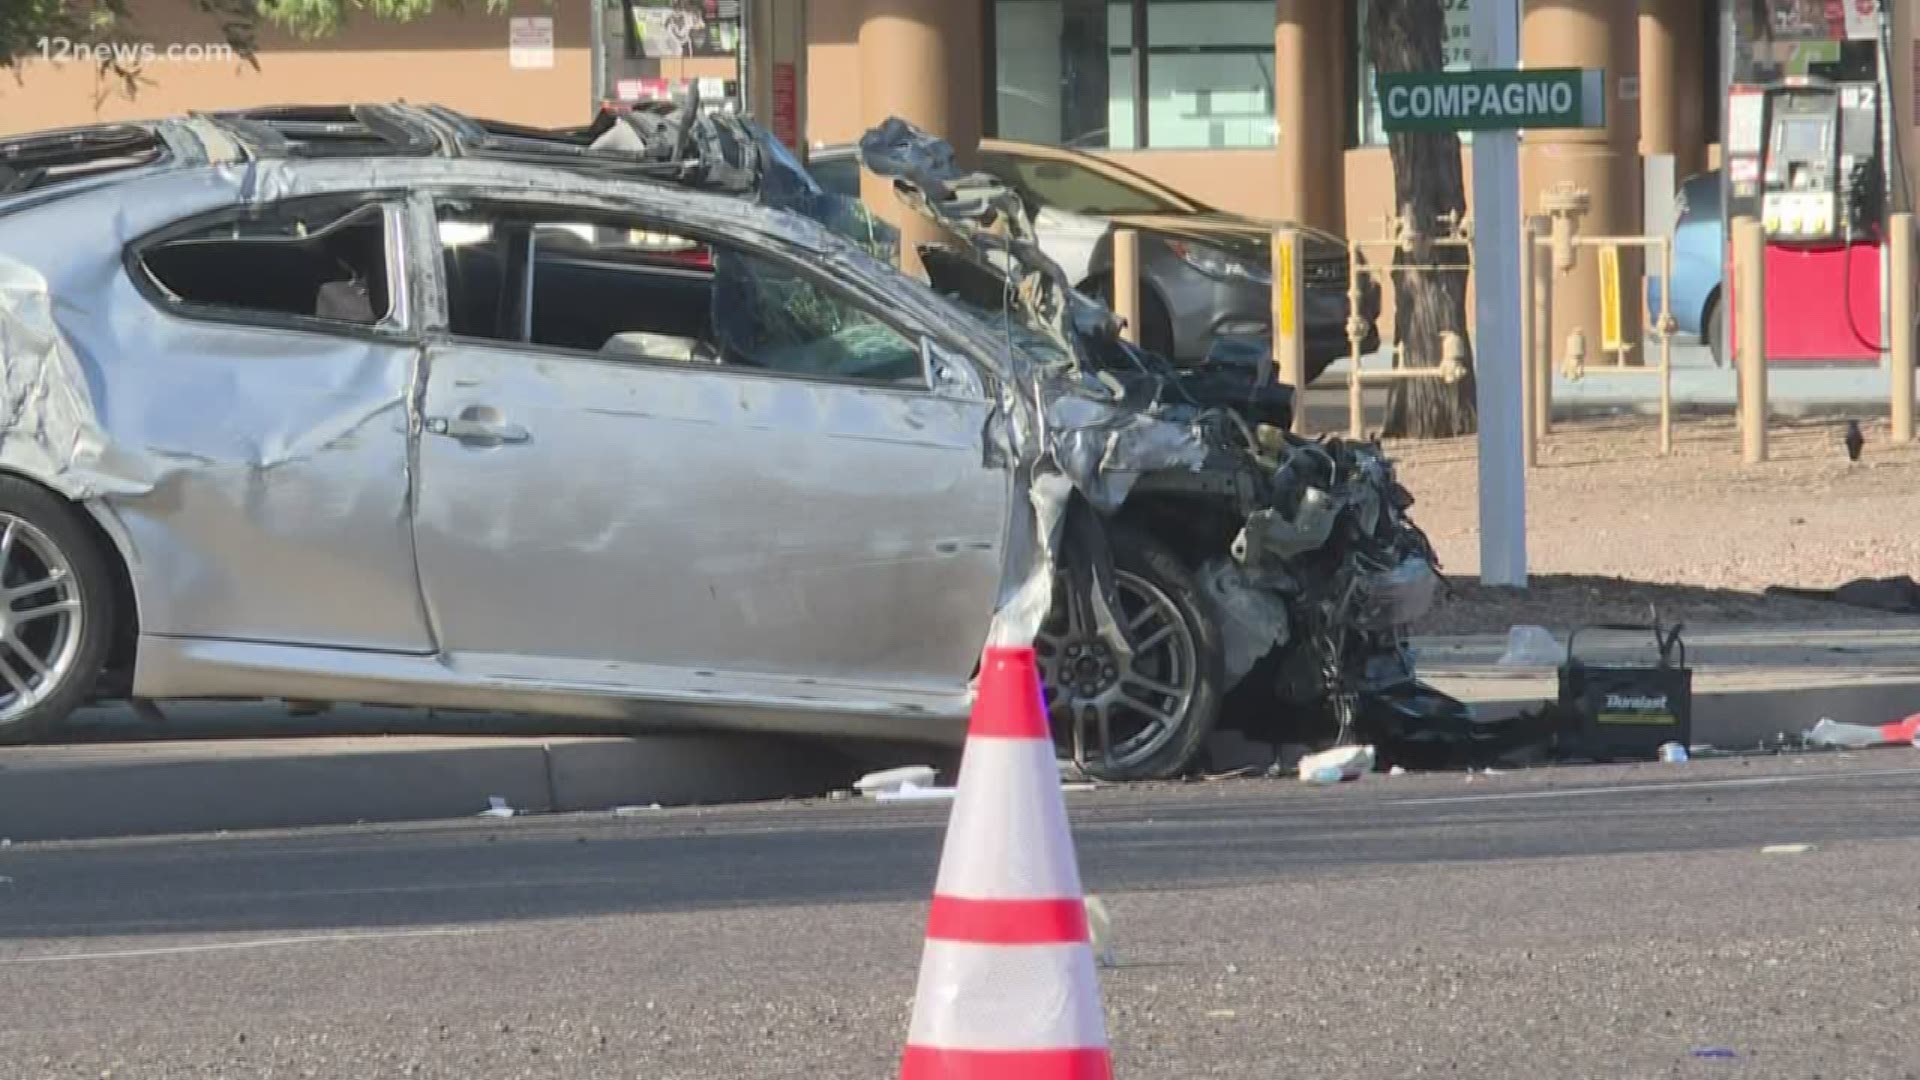 A man was killed after he ran a red light in Scottsdale early Sunday and crashed into another car.